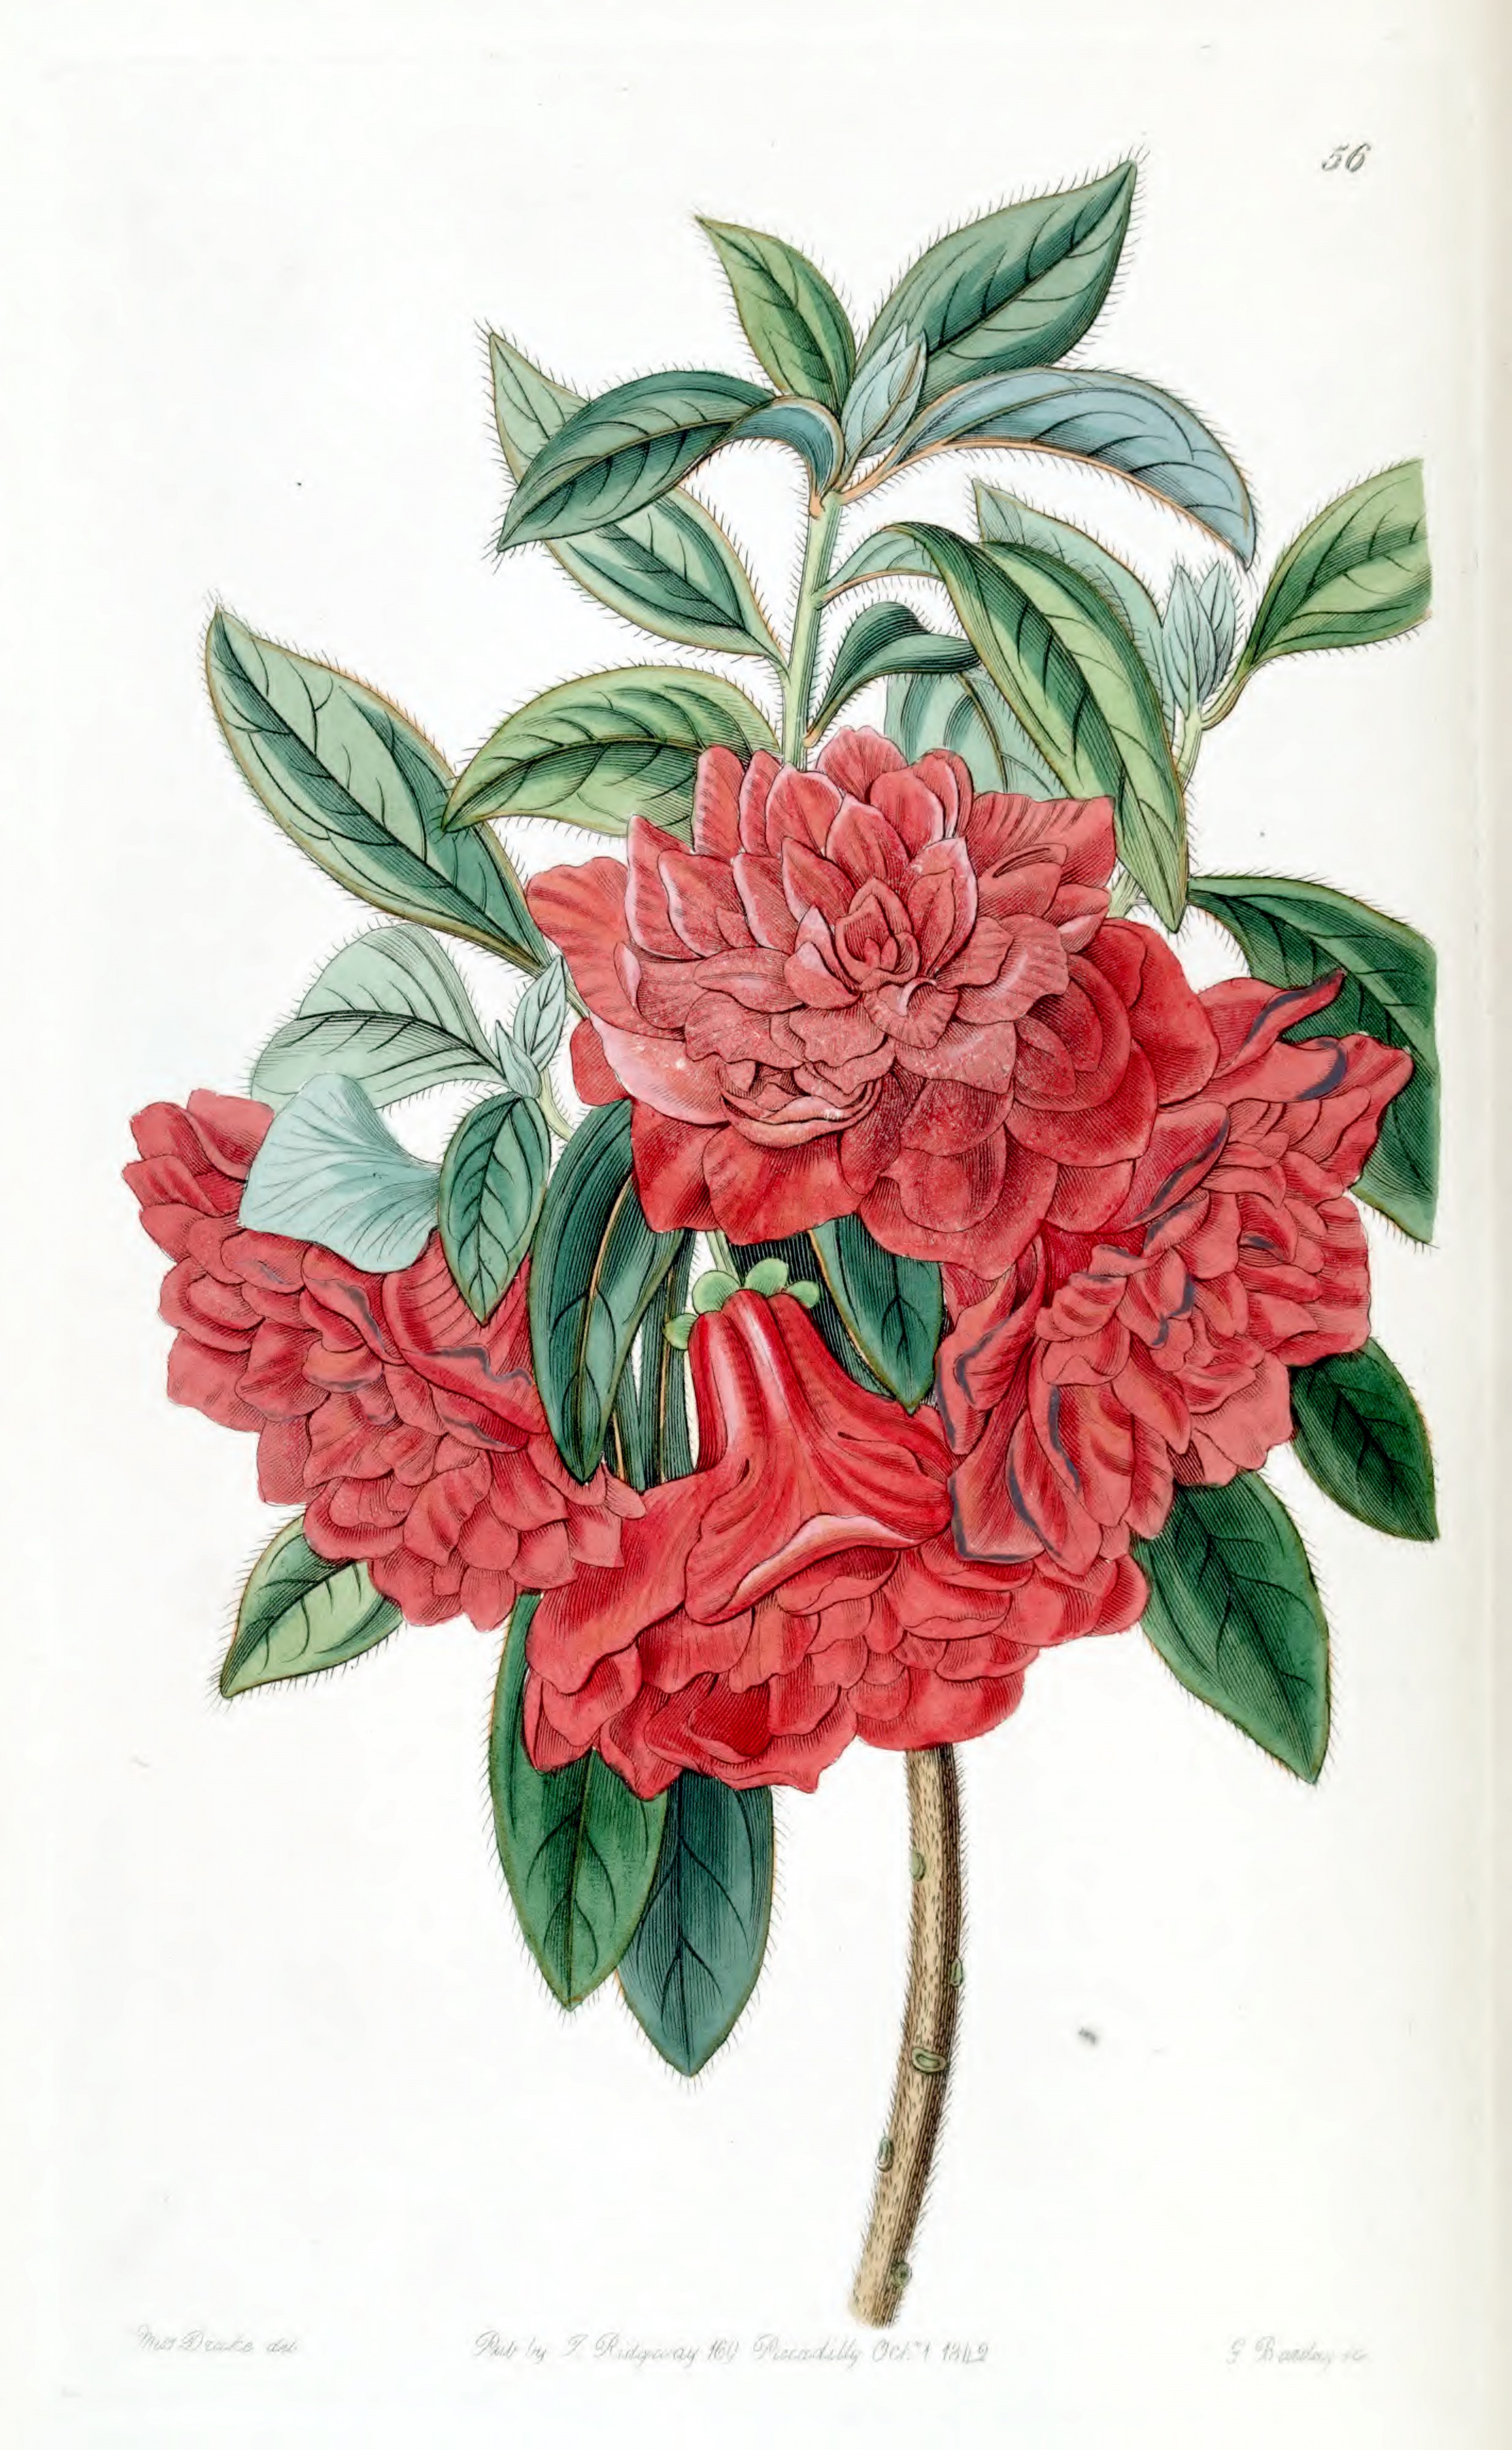 Rhododendron hort. cv. double red by Sarah Ann Drake. Edwards's Botanical Register vol. 28- t. 56 (1842)